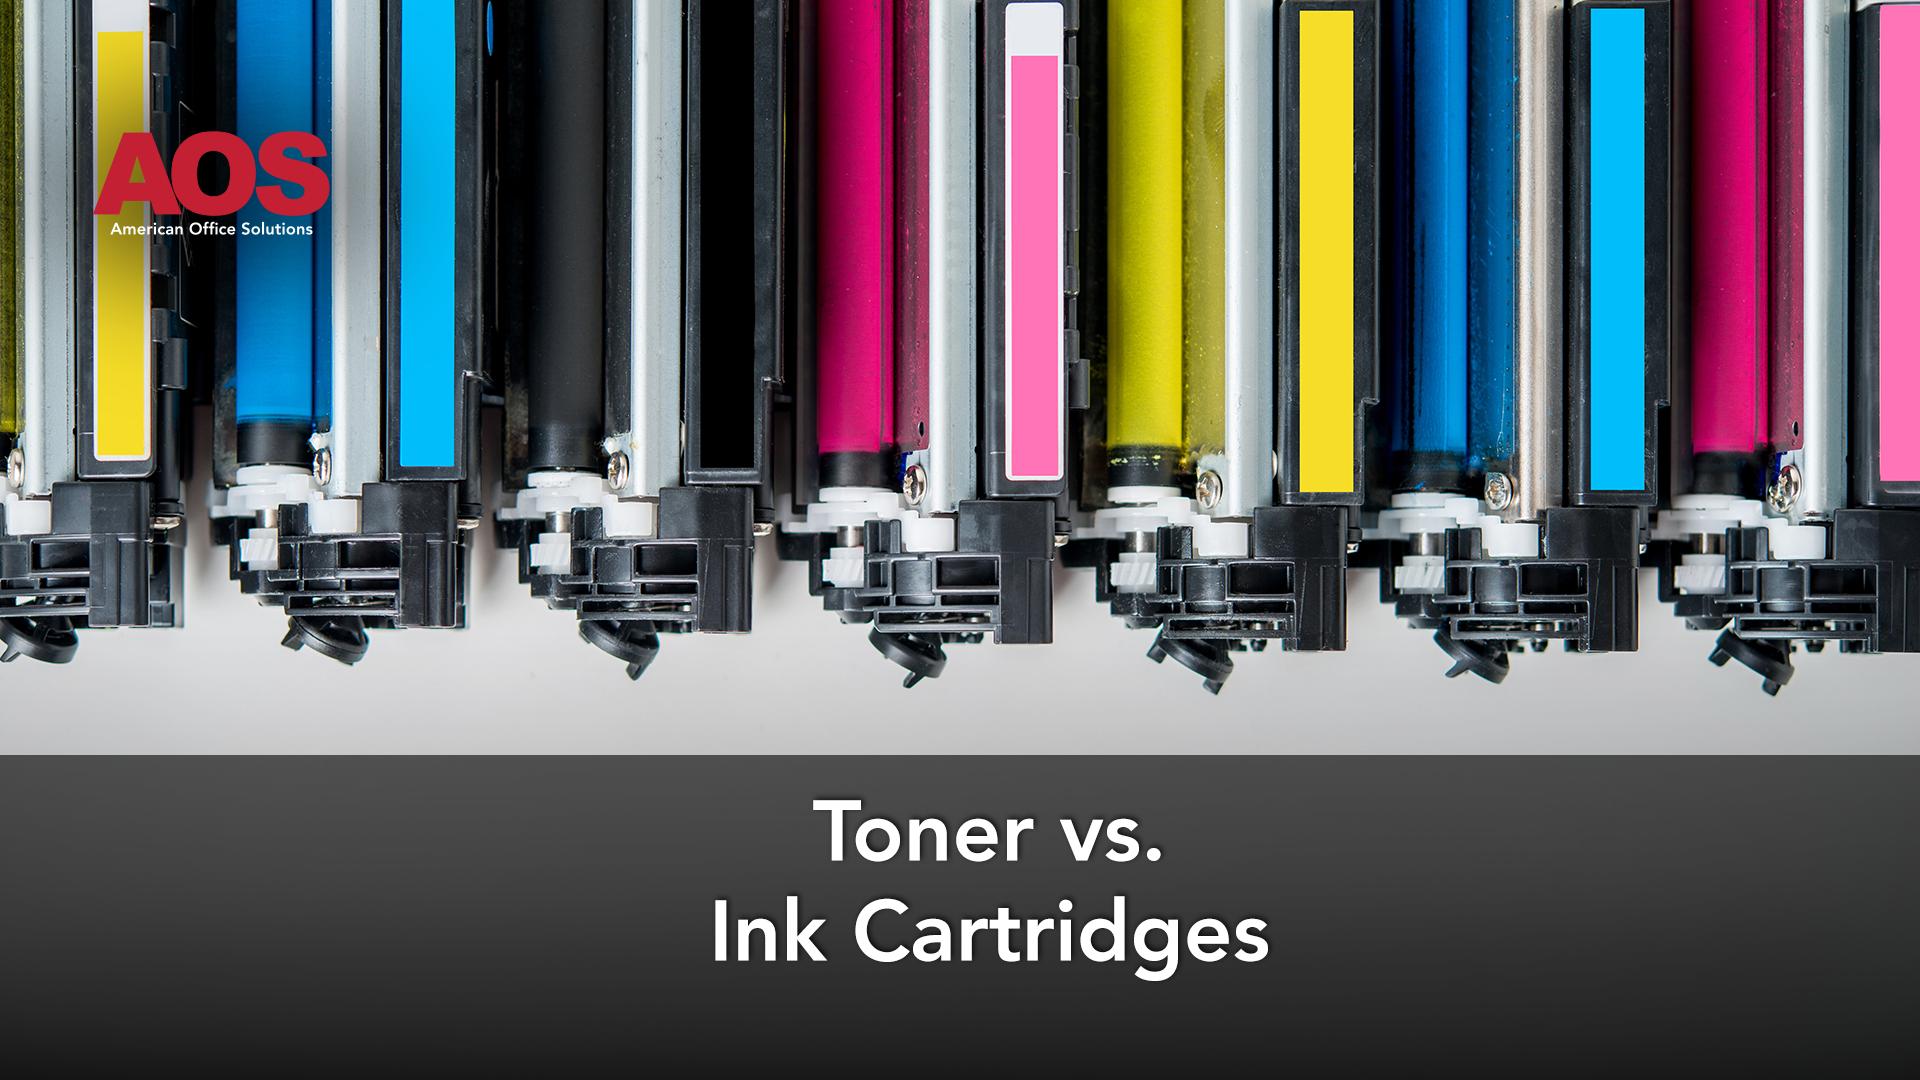 Toner vs. Ink Cartridges: What's Difference?